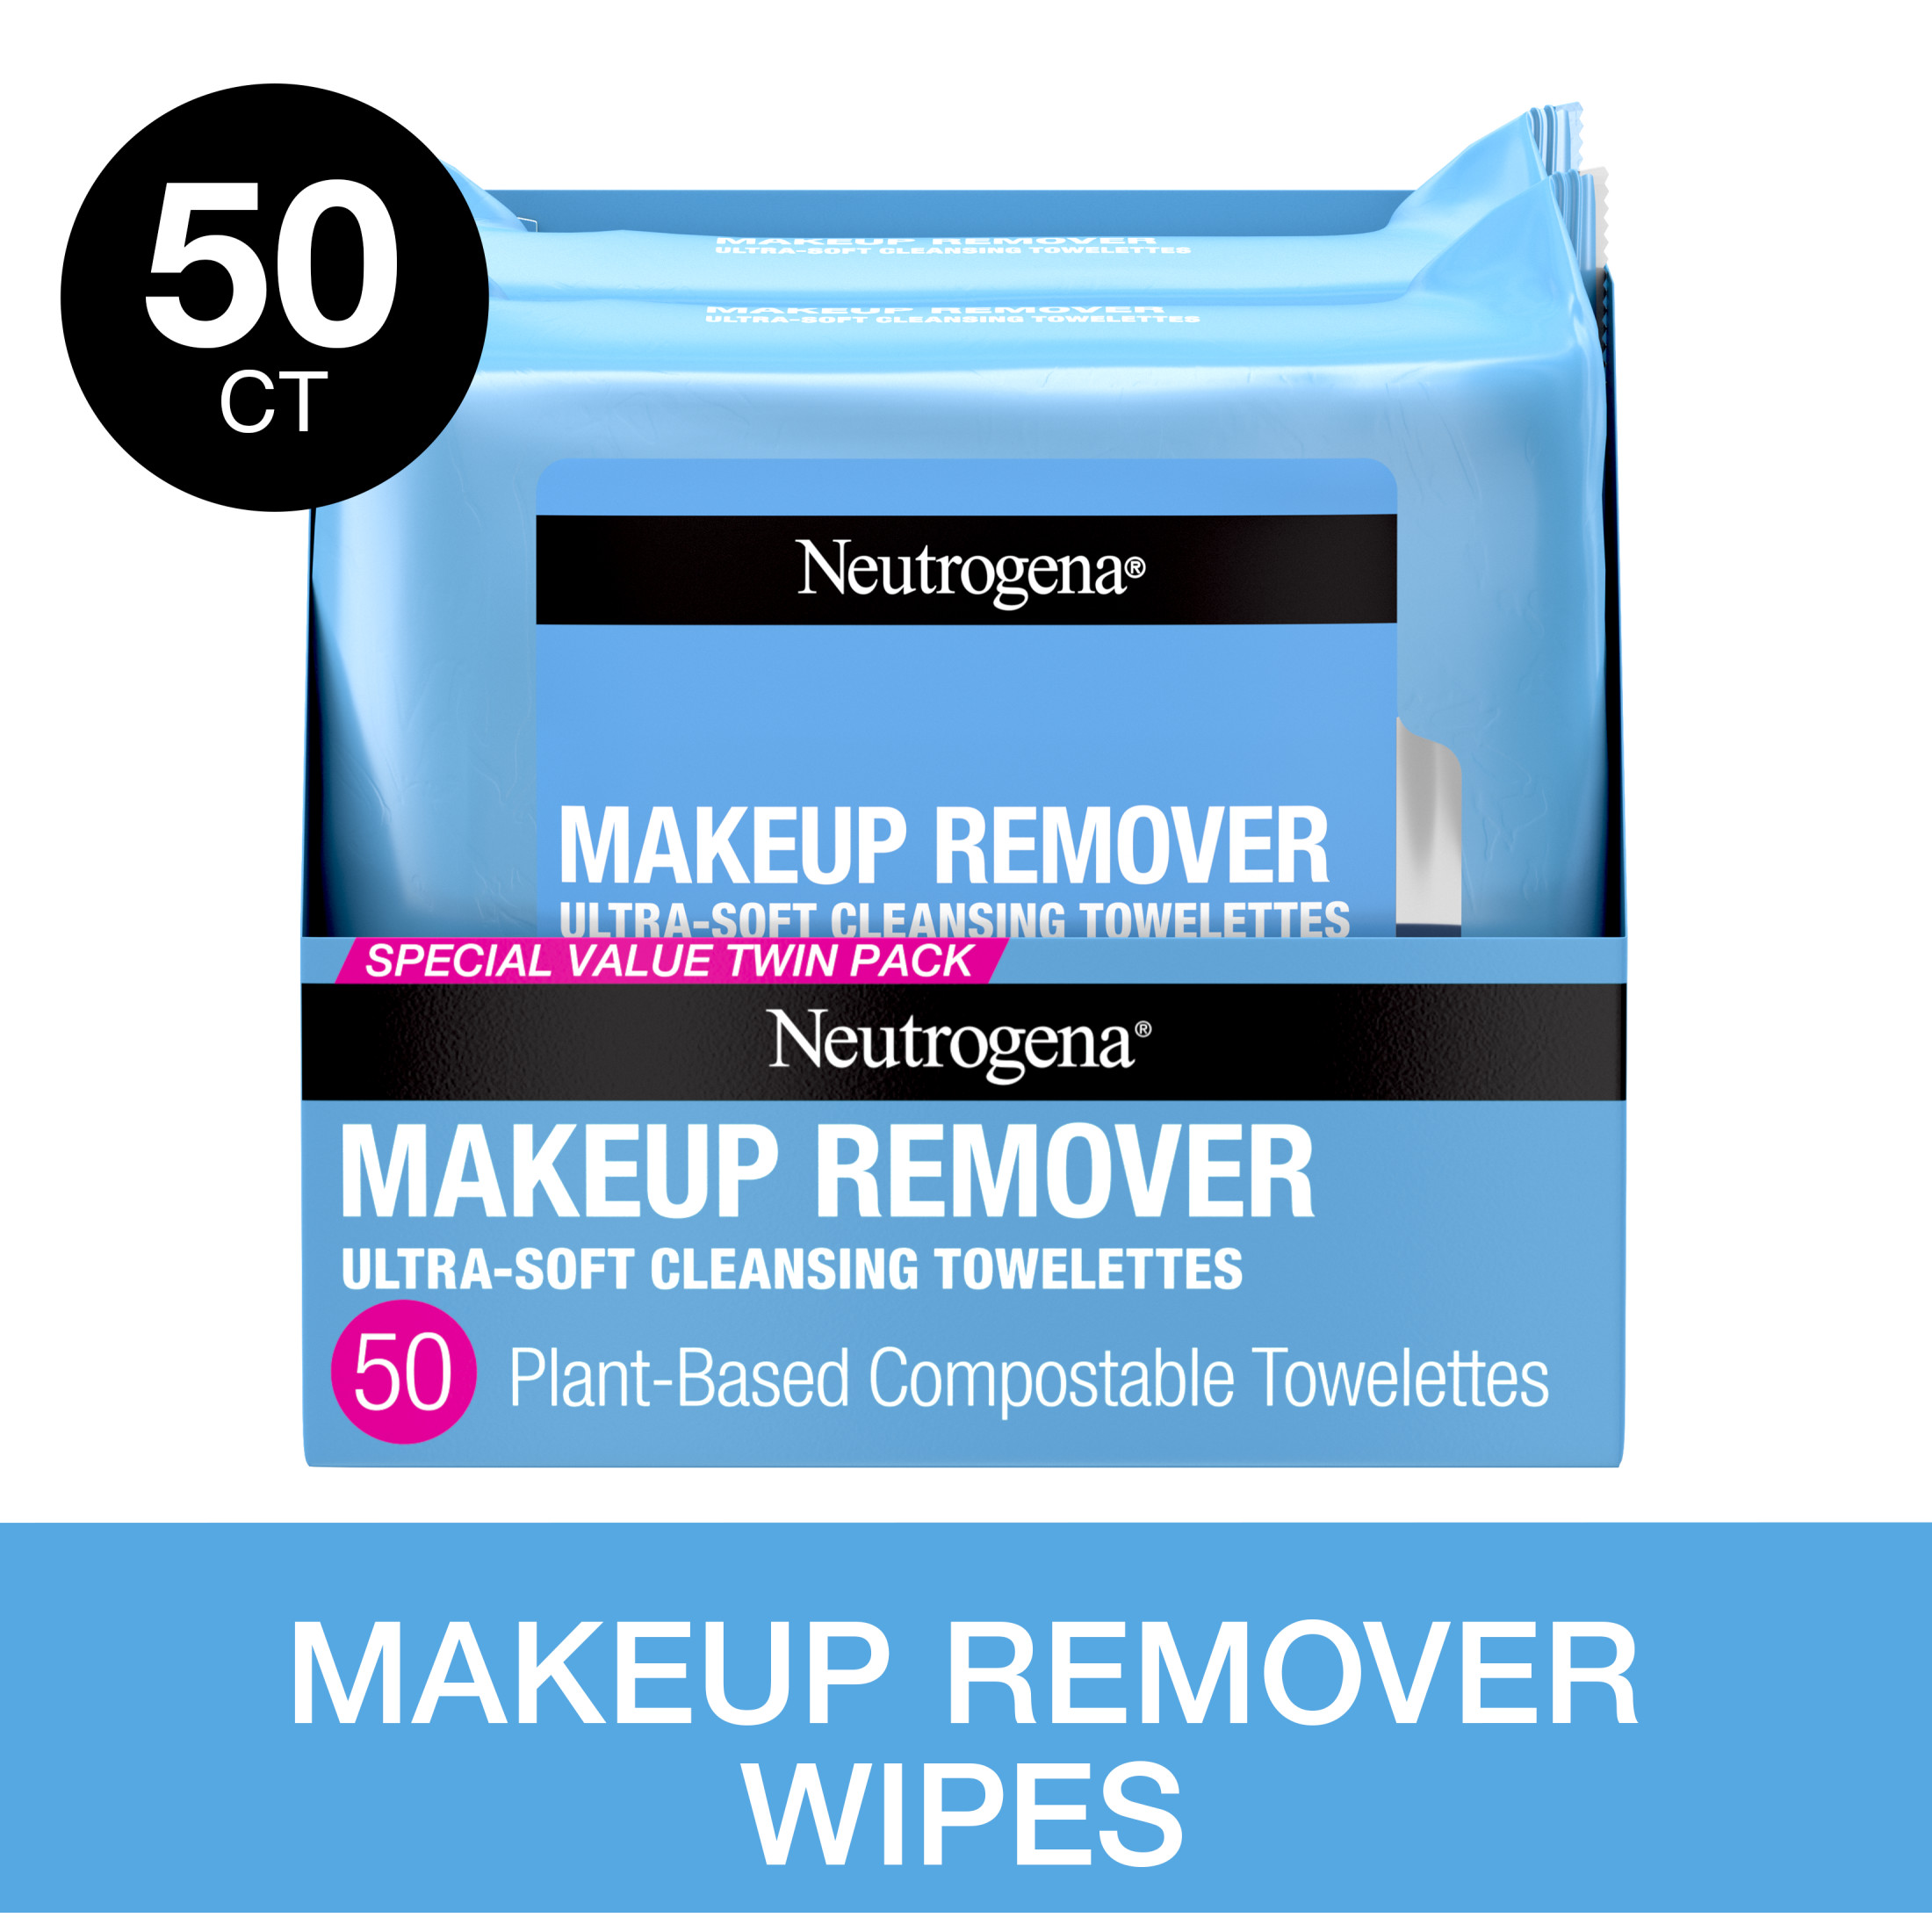 Neutrogena Makeup Remover Wipes and Face Cleansing Towelettes, 25 Count, (2 Pack) - image 1 of 10